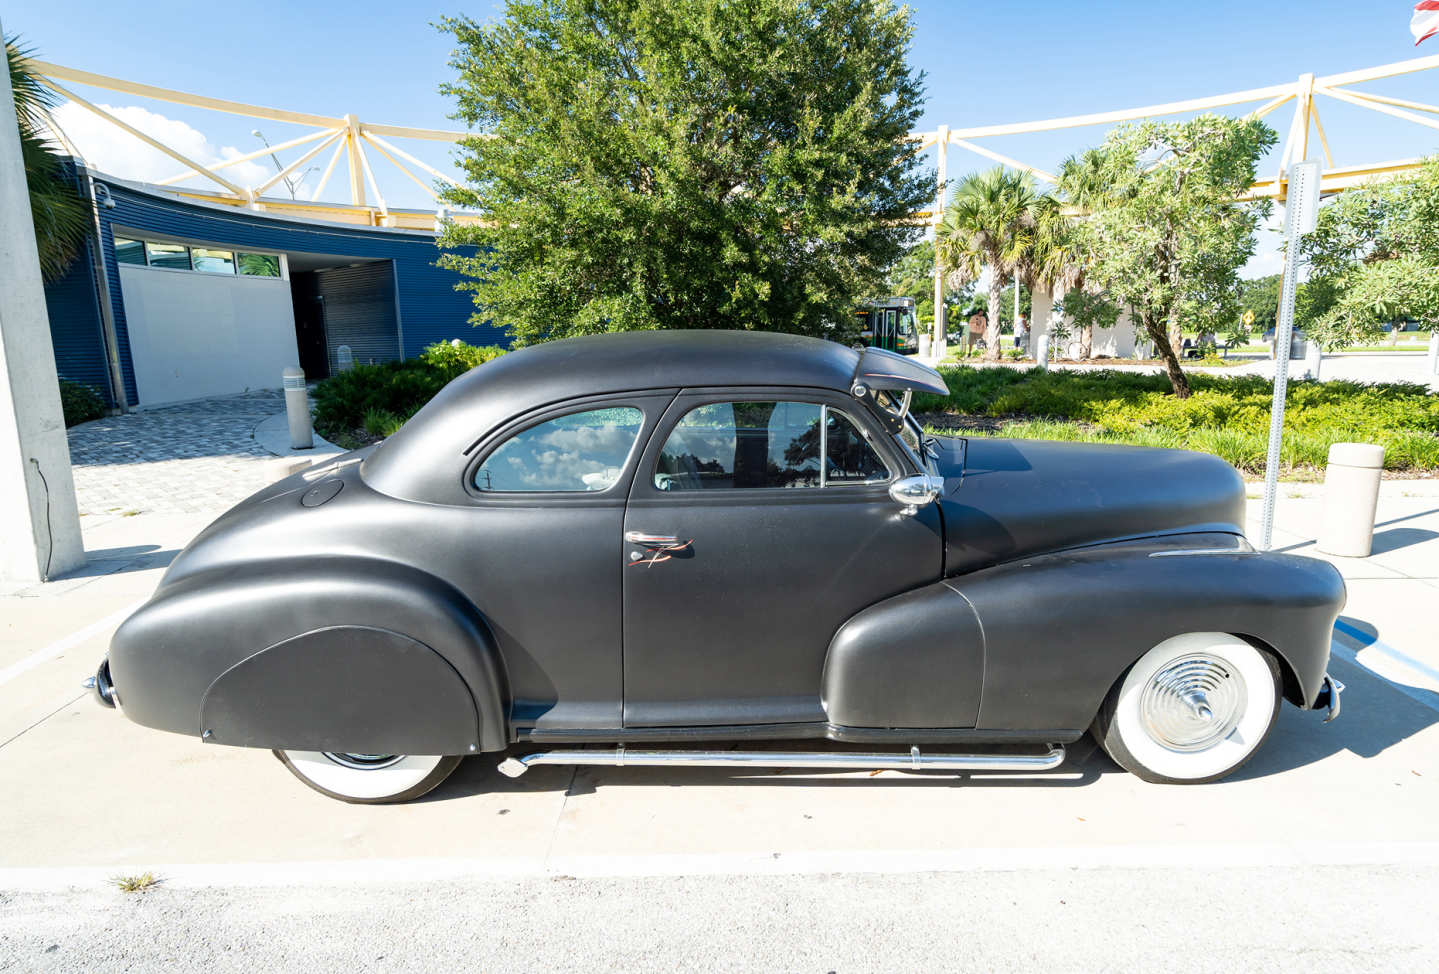 4th Image of a 1947 CHEVROLET COUPE